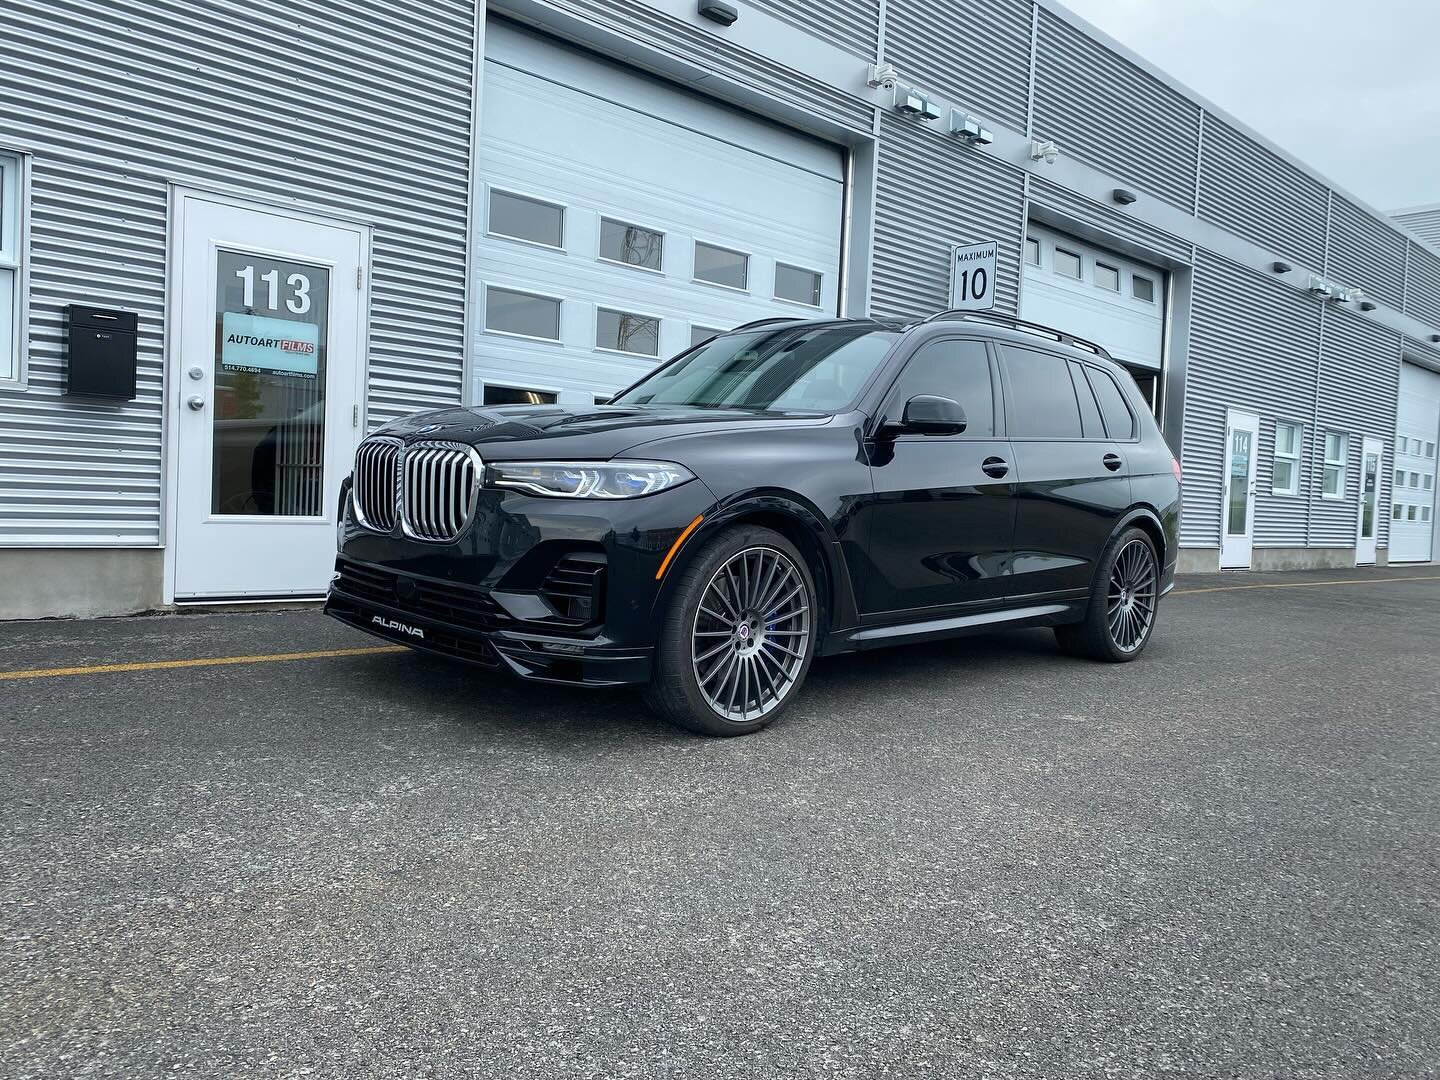 Elevating the BMW X7 Alpina to the pinnacle of perfection &ndash; complete PPF, ceramic coating, and temperature control window film. 🚗✨ #BMW #Alpina #PPF #CeramicCoating #WindowFilm #LuxuryCars #autoart #autoartfilms